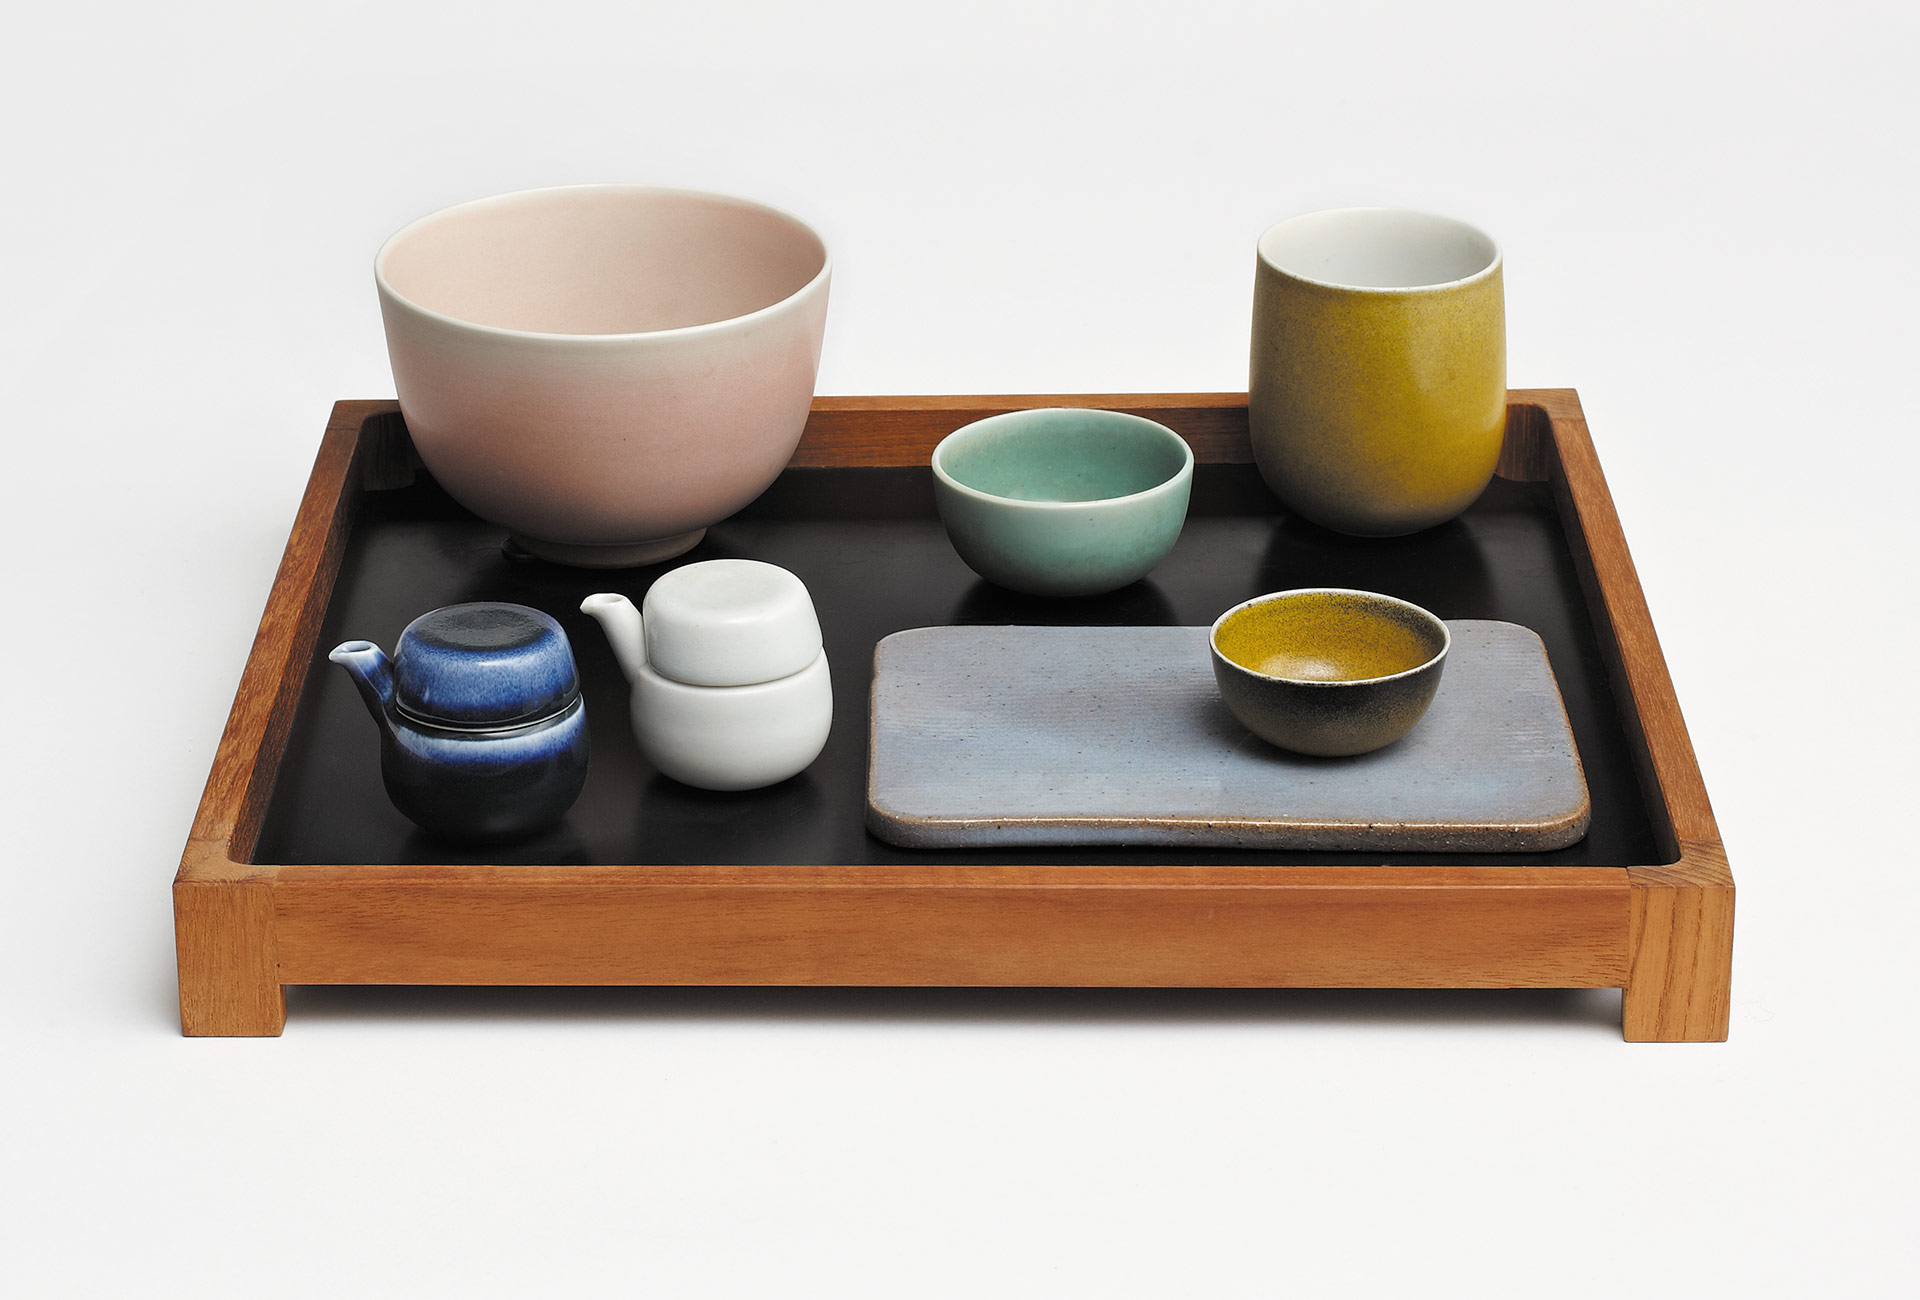 Tray with vessels by Snorre Stephensen, 1984. Teak, formica, porcelain